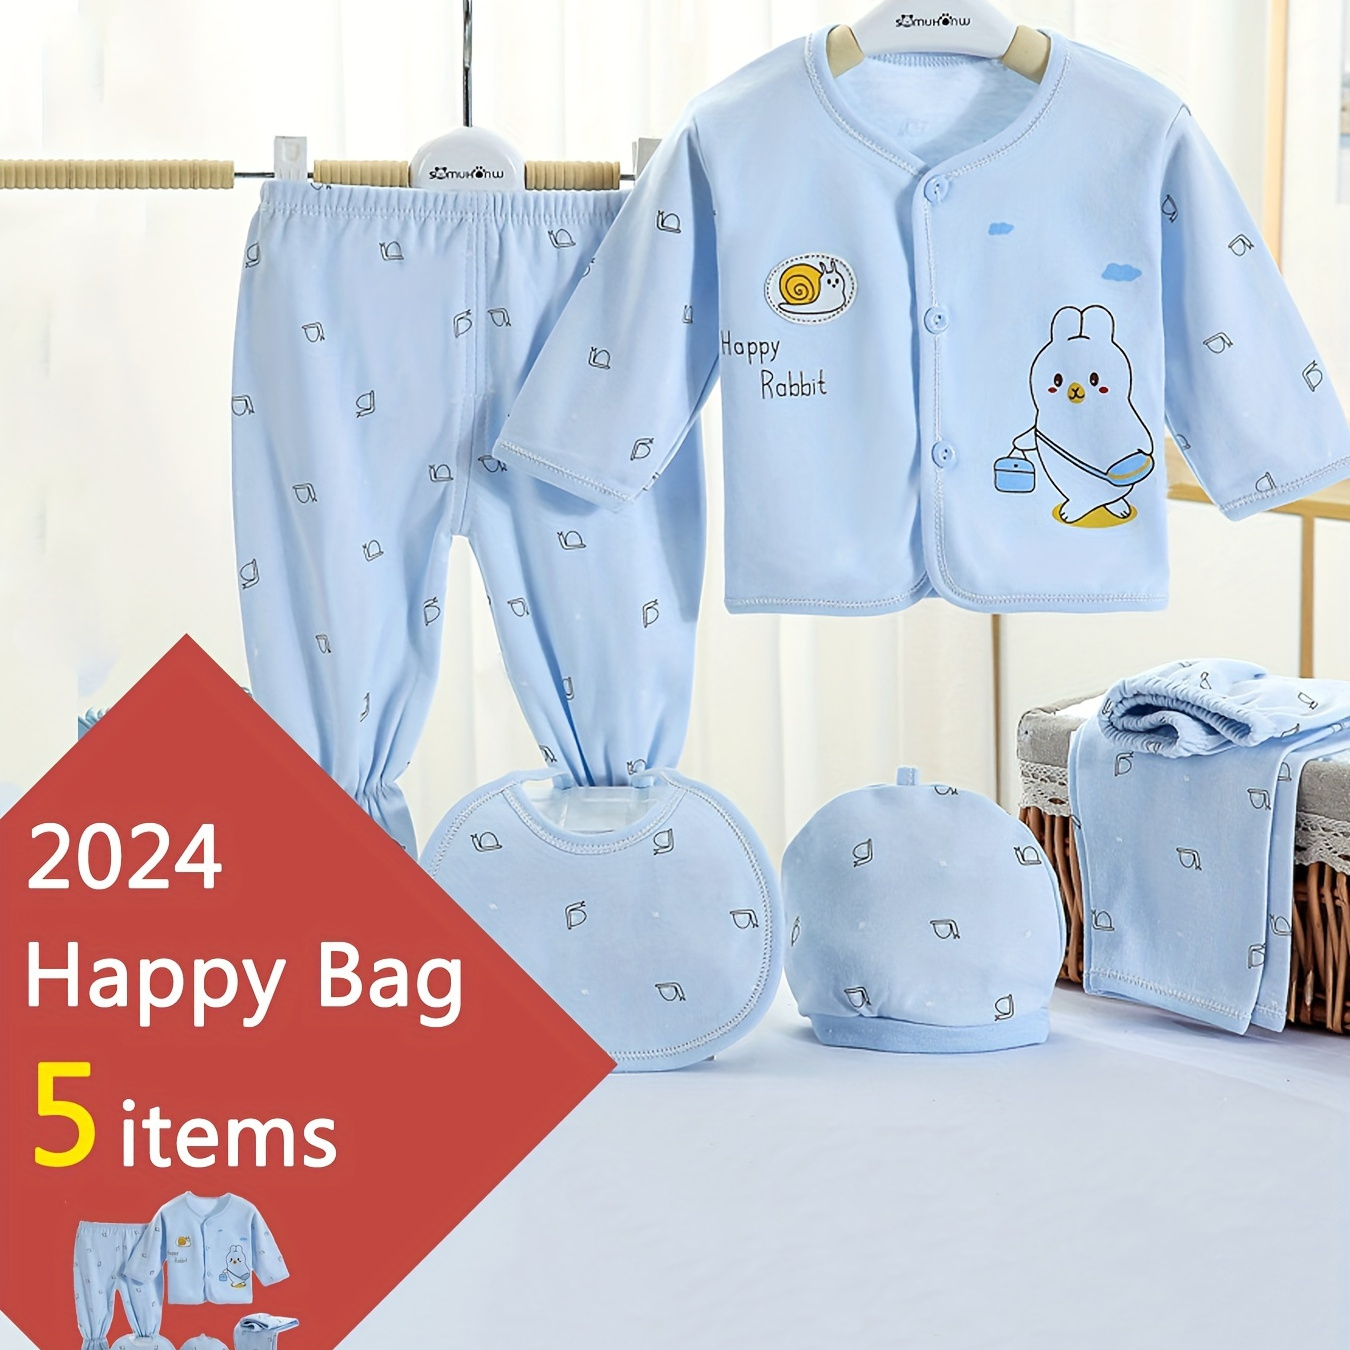 

2024 Lucky Bag, 5pcs Newborn Clothes Outfits Gifts - Cute Cartoon Graphic Cardigan Top + Hat + Footed Pants + Trousers + Bib, Toddler Baby's Cotton Clothes Set, Suitable For 0-3 Months